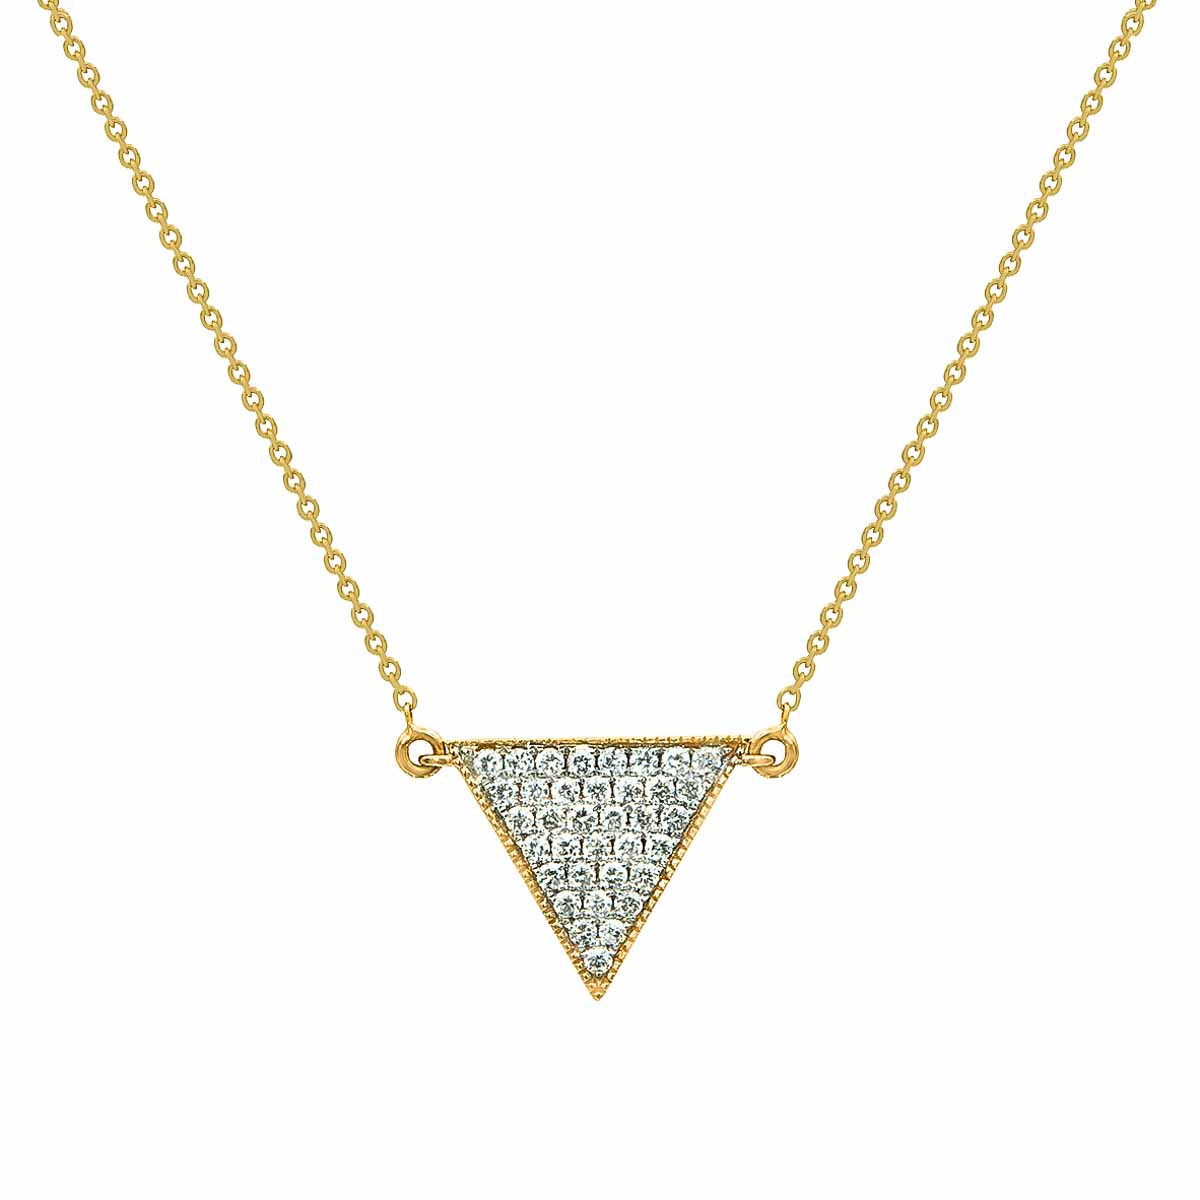 Geometric Triangle Pave Diamond Gold Pendant with Gold Chain